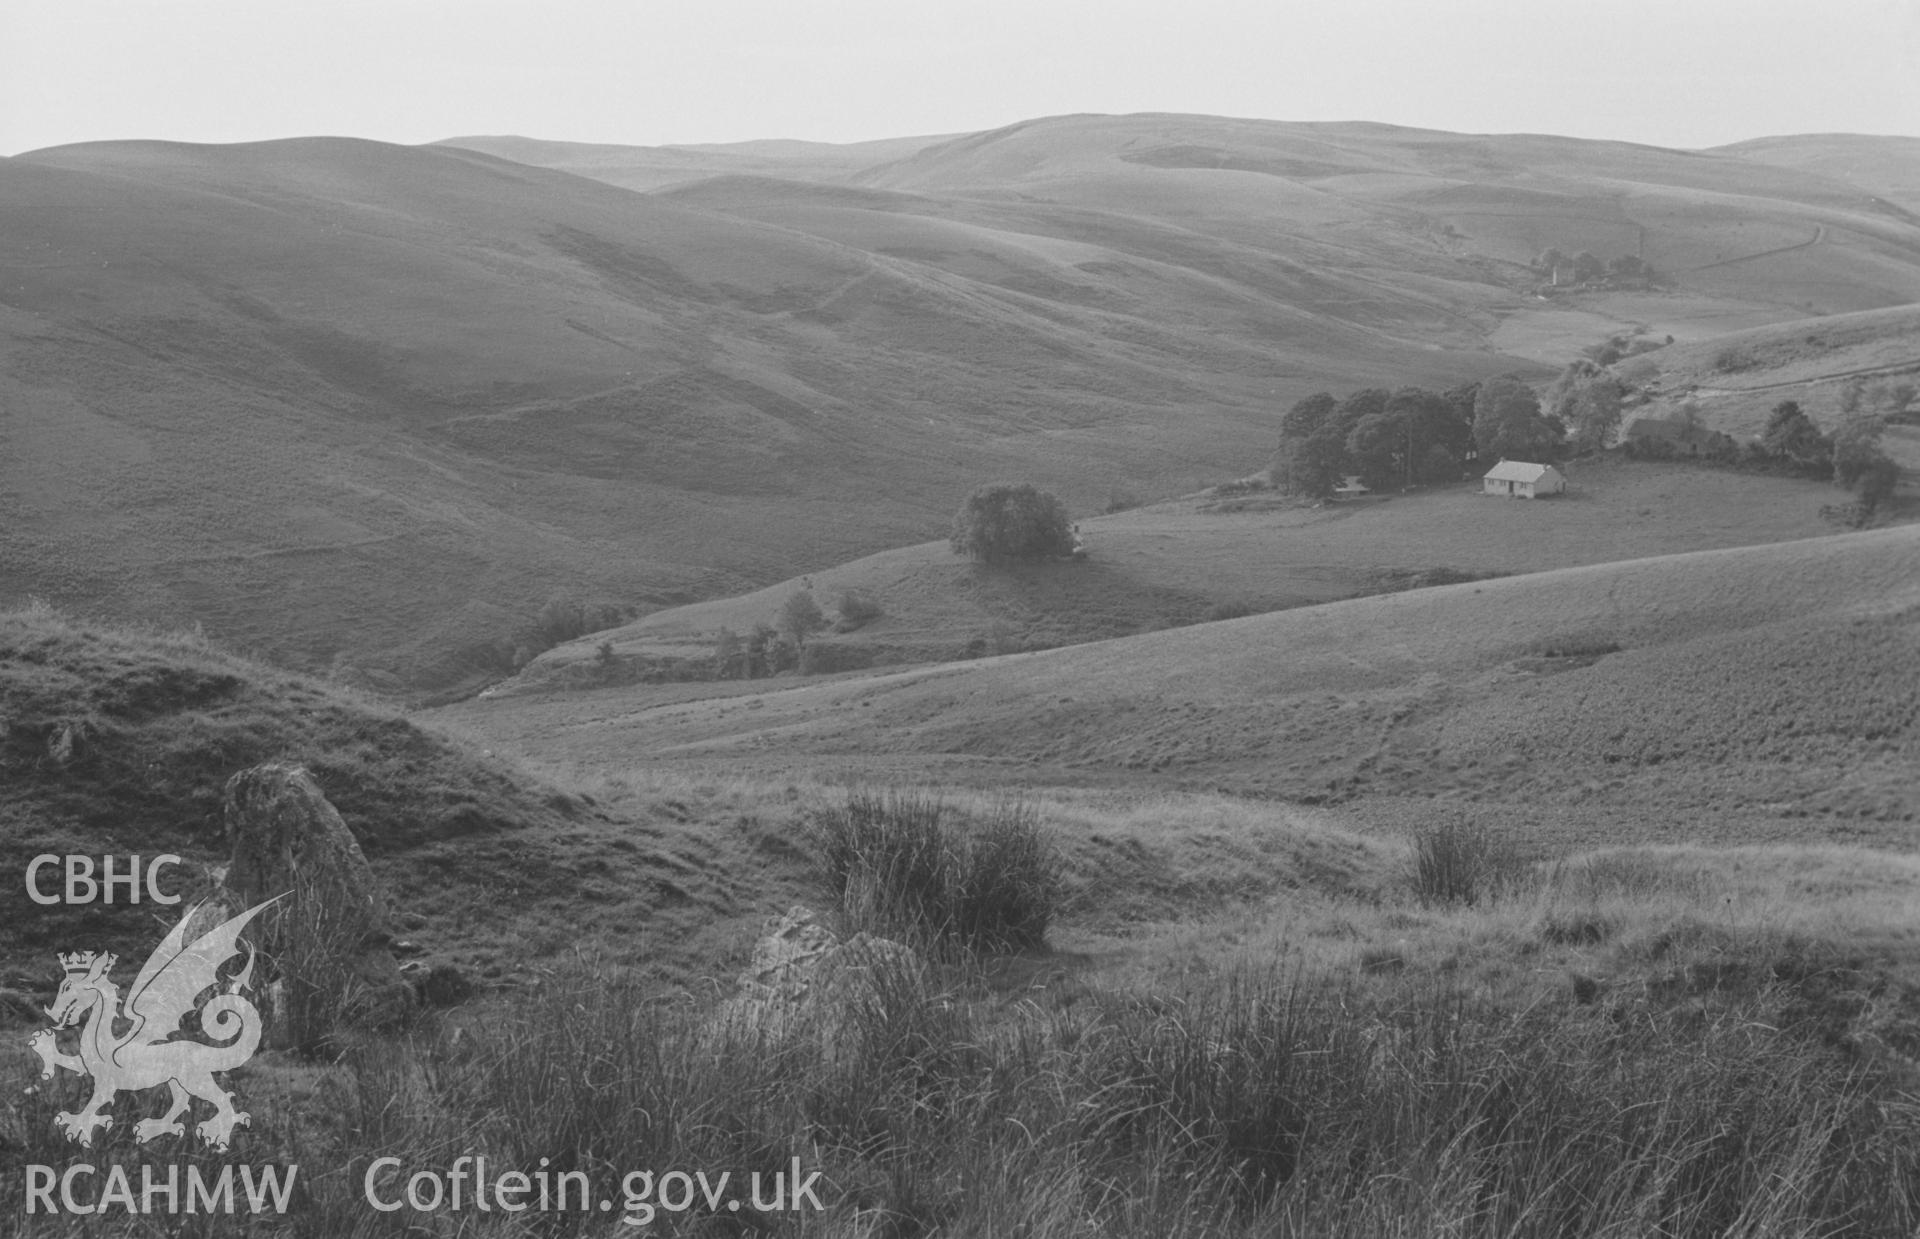 Digital copy of black & white negative showing view looking up the valley of Pysgotwr Fawr; Bryn-Ambor farm and lead mine in middle distance; Bryn-Glas in far distance on right. Photograph by Arthur O. Chater, September 1966, looking west from SN 749 507.